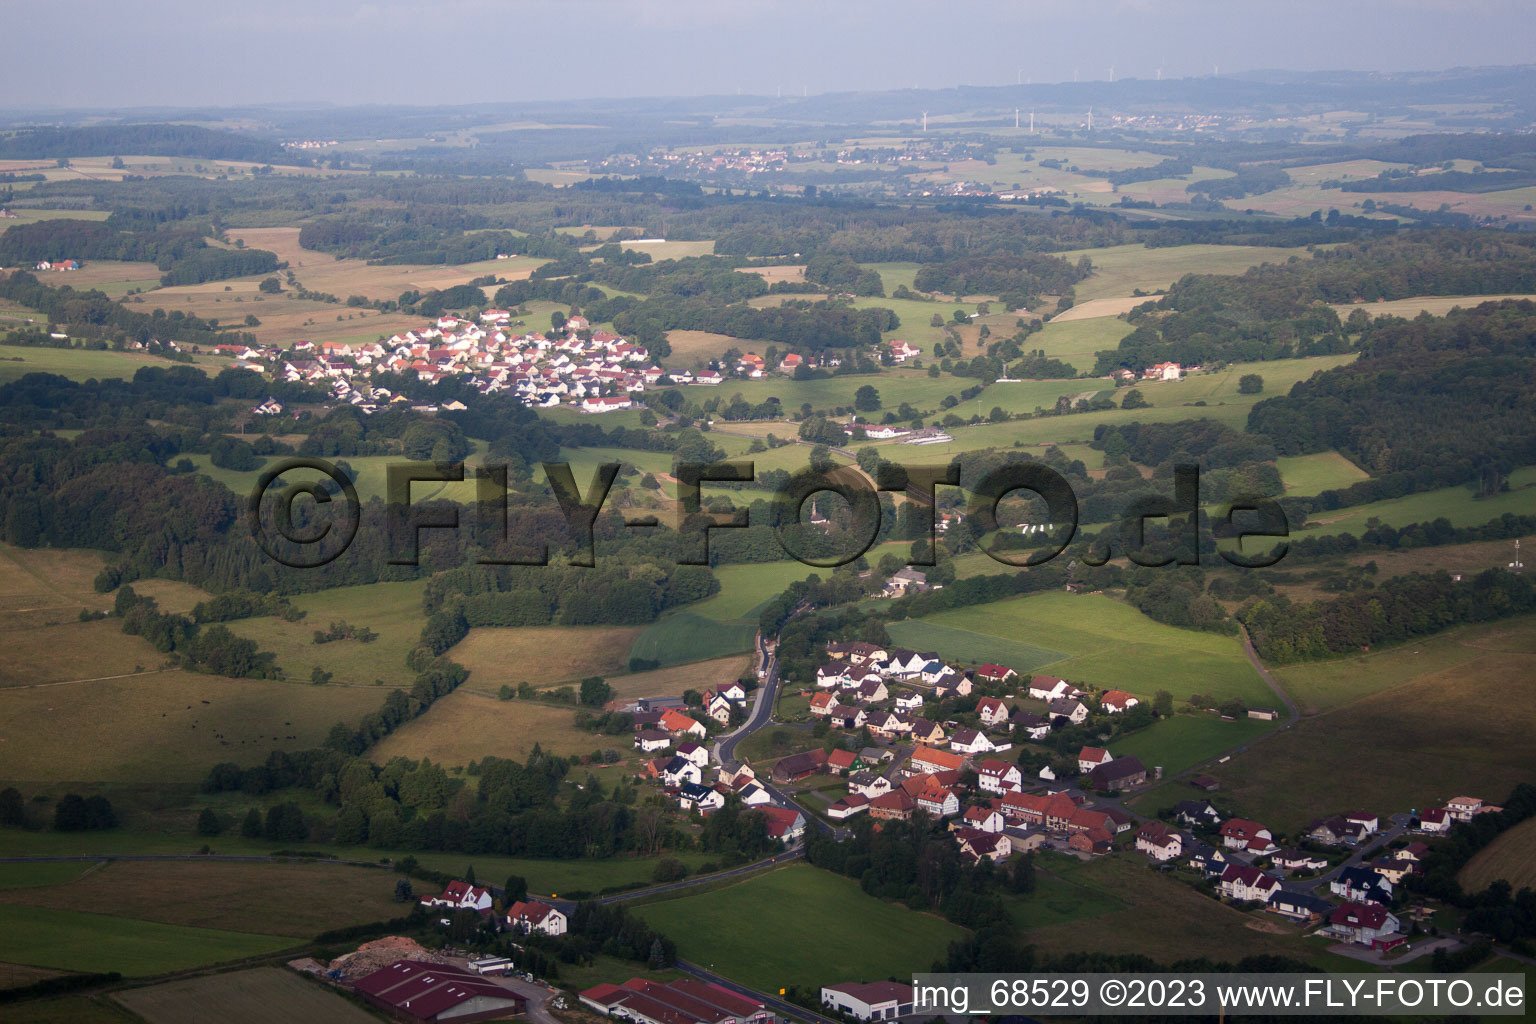 Hosenfeld in the state Hesse, Germany from above